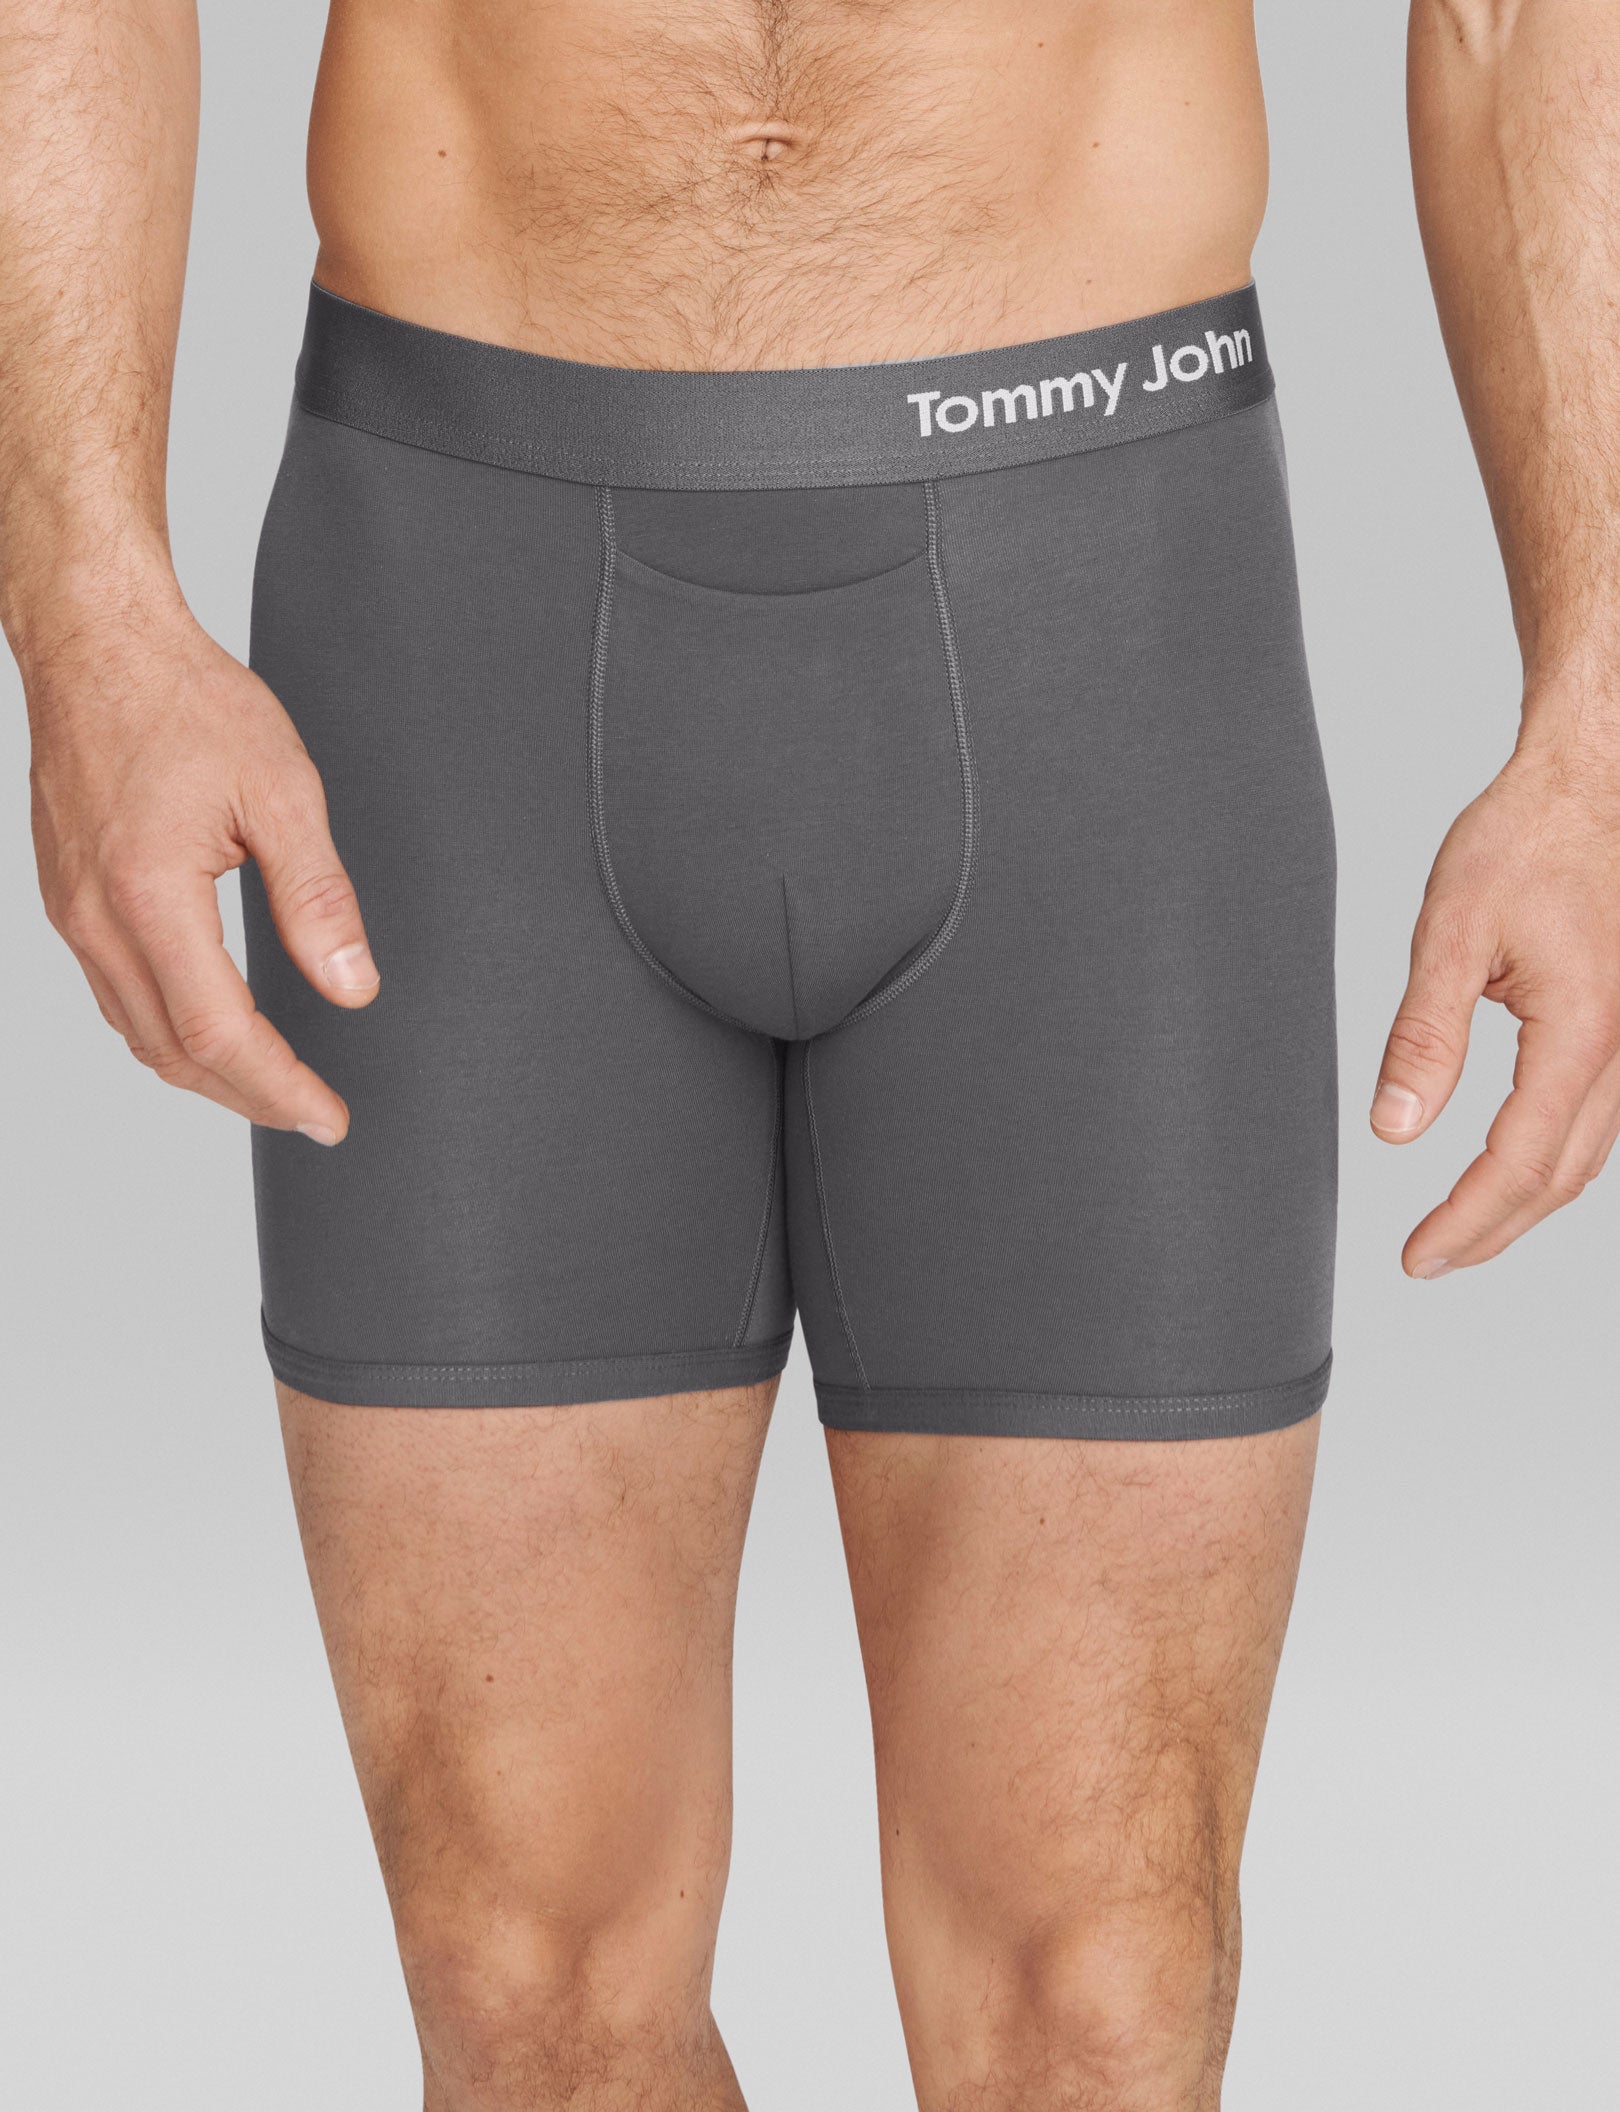 Tommy John Cool Cotton 6 Boxer Brief